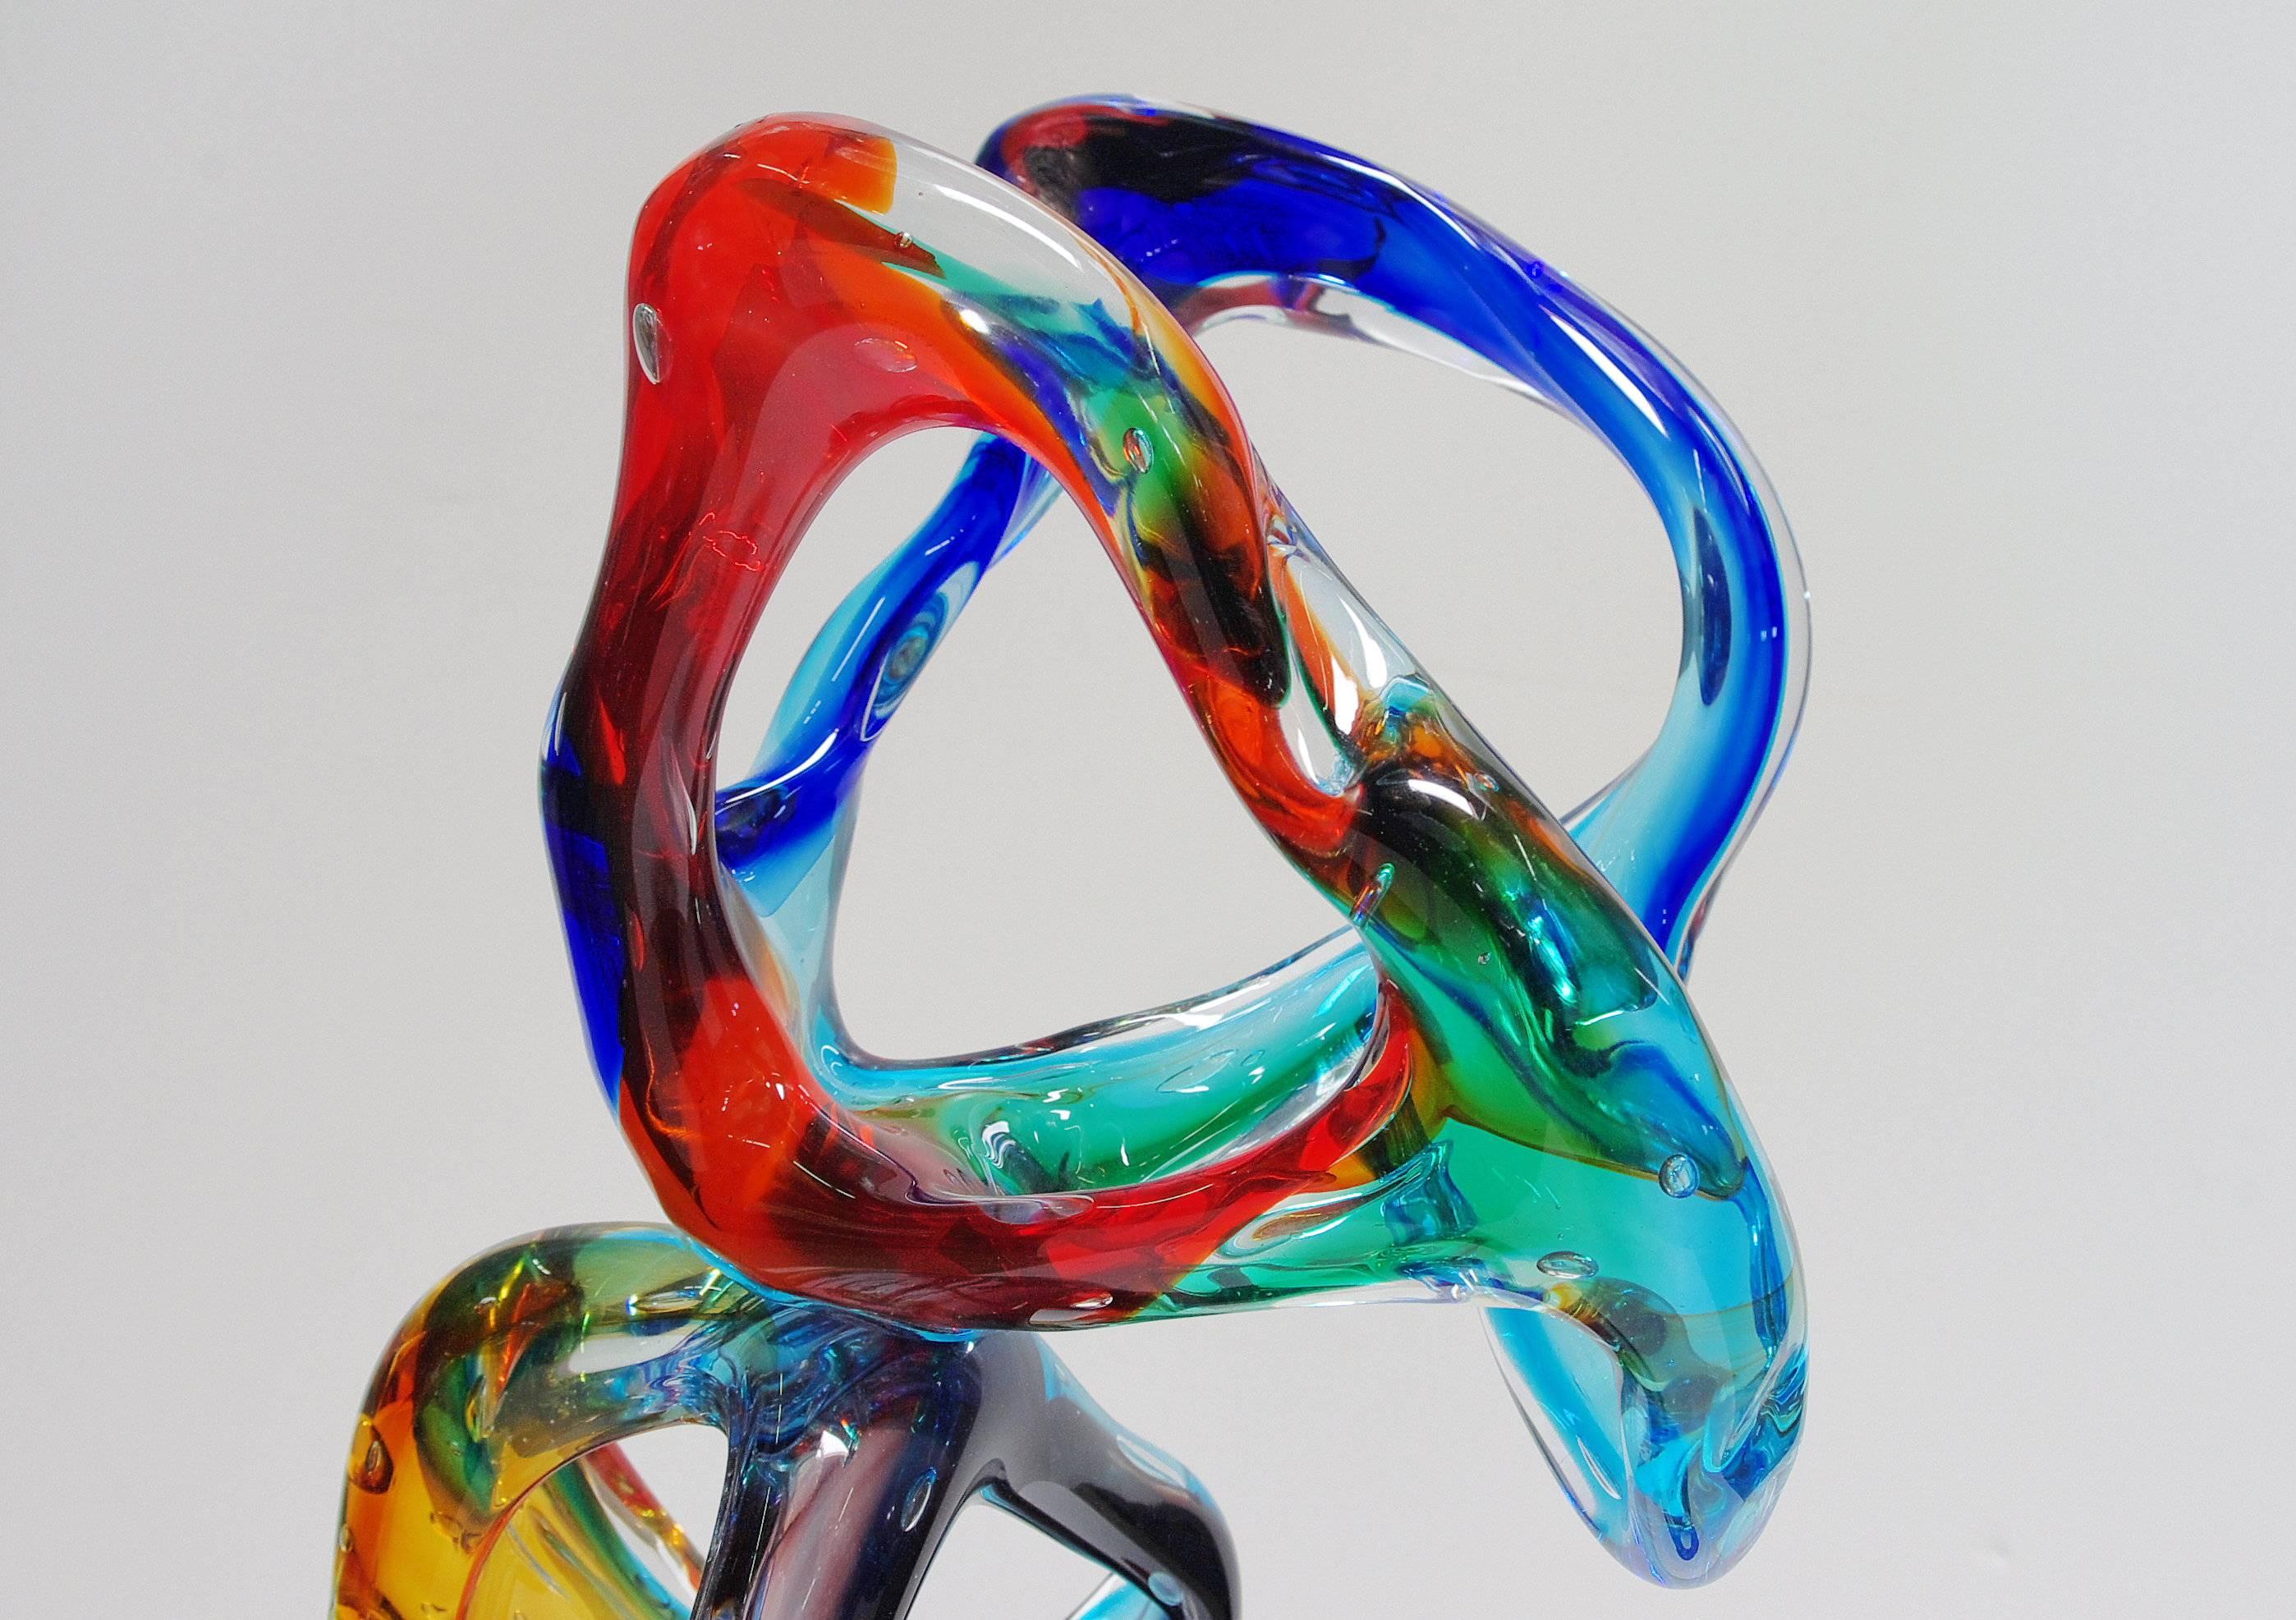 Italian abstract sculpture with hand blown and crafted multi-color Murano glass by Sergio Constantini, signed “Constantini S.” on the base / Made in Italy in the 1980’s
Diameter: 8 inches / Height: 29.5 inches
1 in stock in Palm Springs currently ON